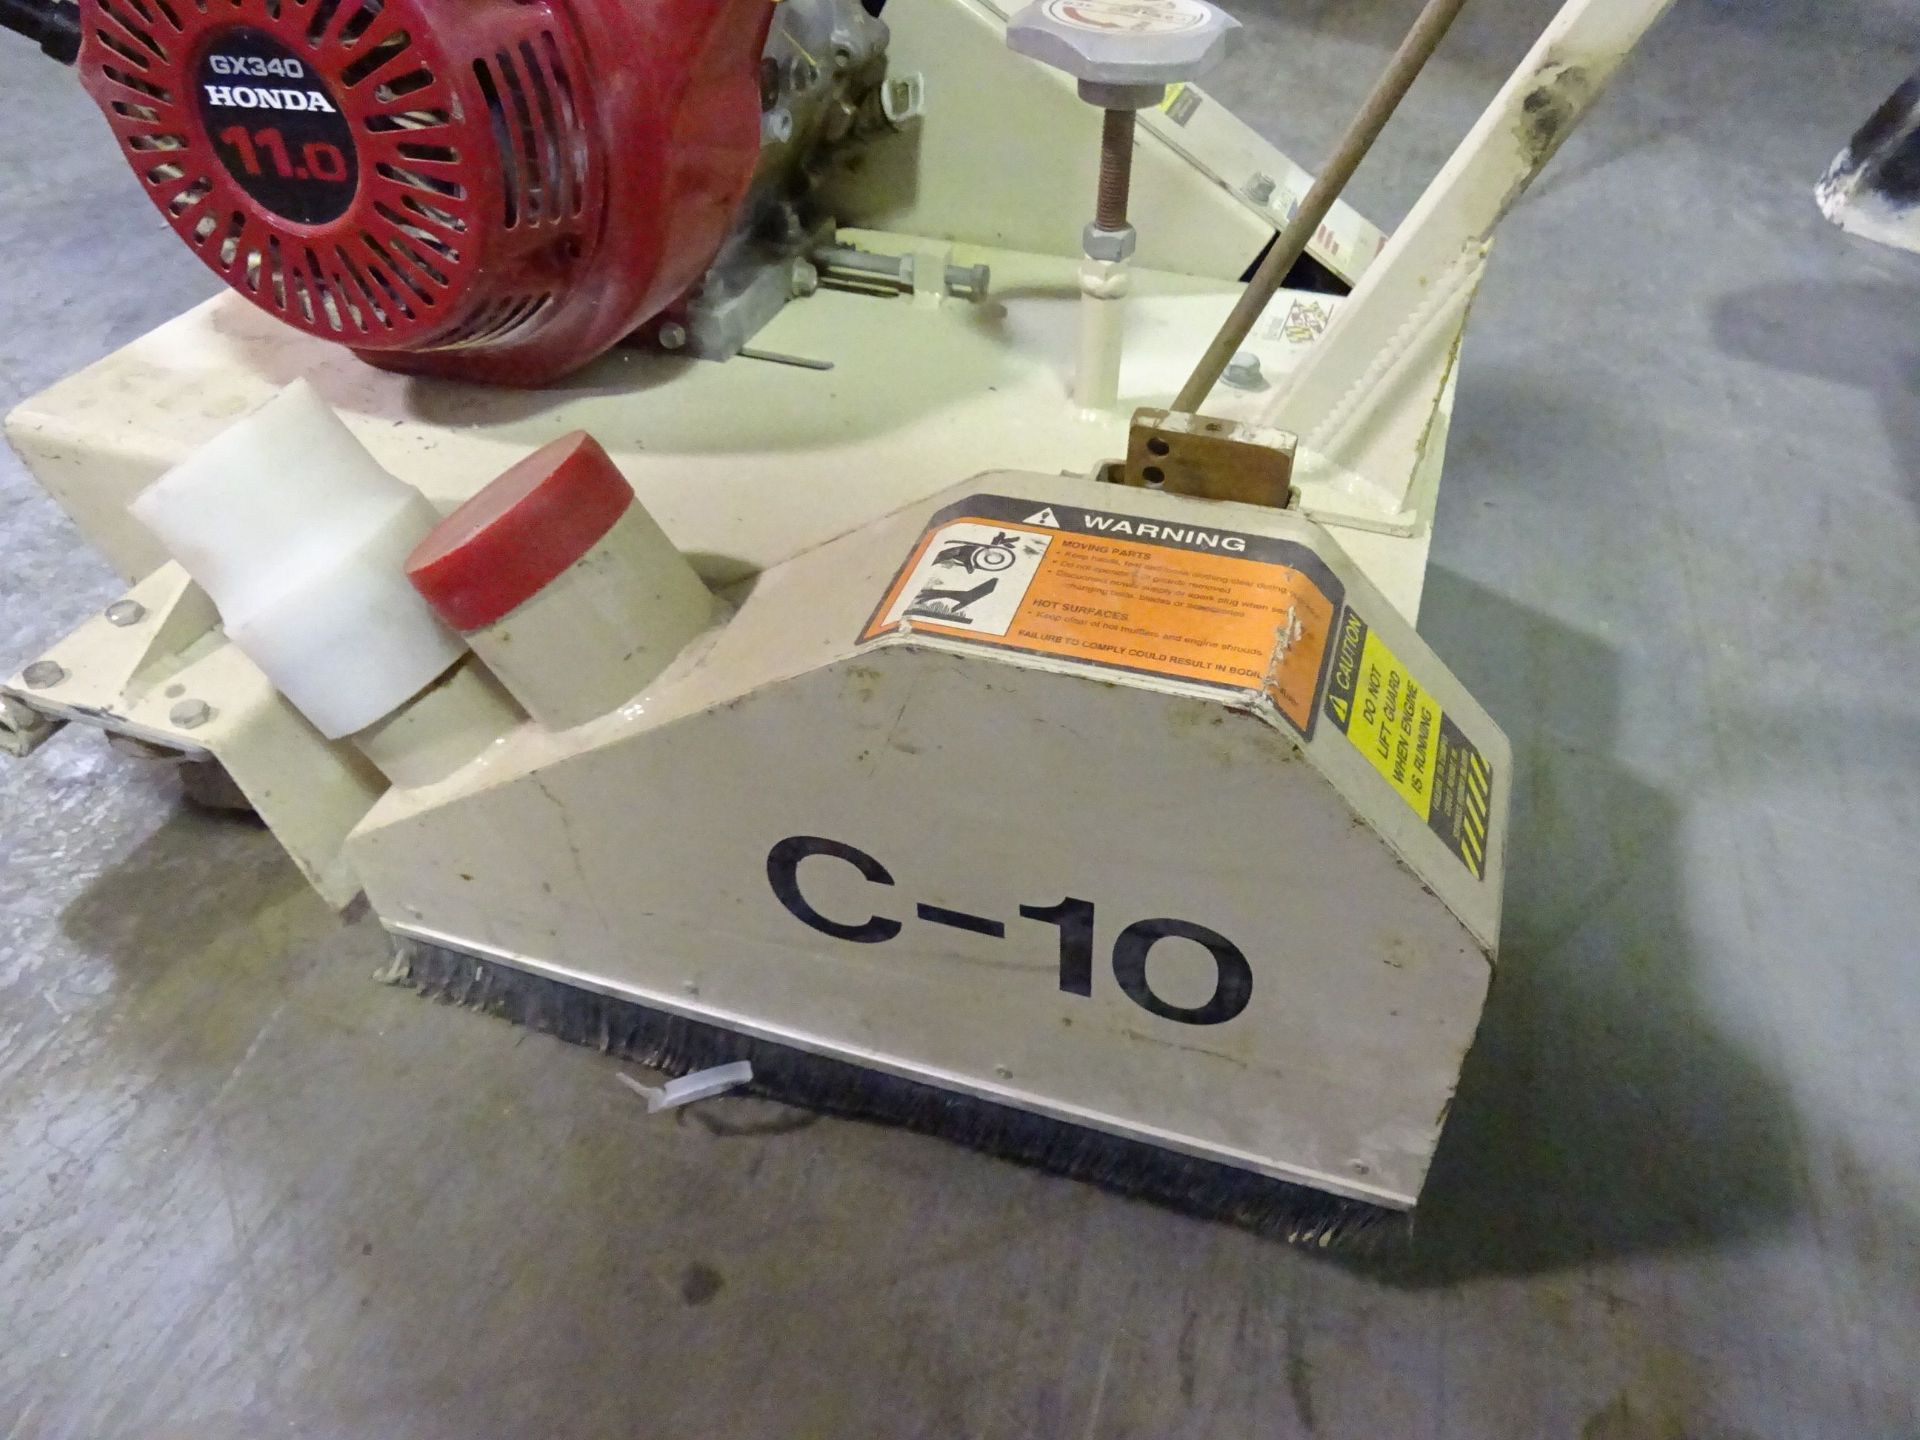 8" EDCO MODEL C10-11H GAS POWERED CRANK CHASING SAW; S/N 1498 **LOCATED AT 6600 STOCKTON ROAD, - Image 7 of 7